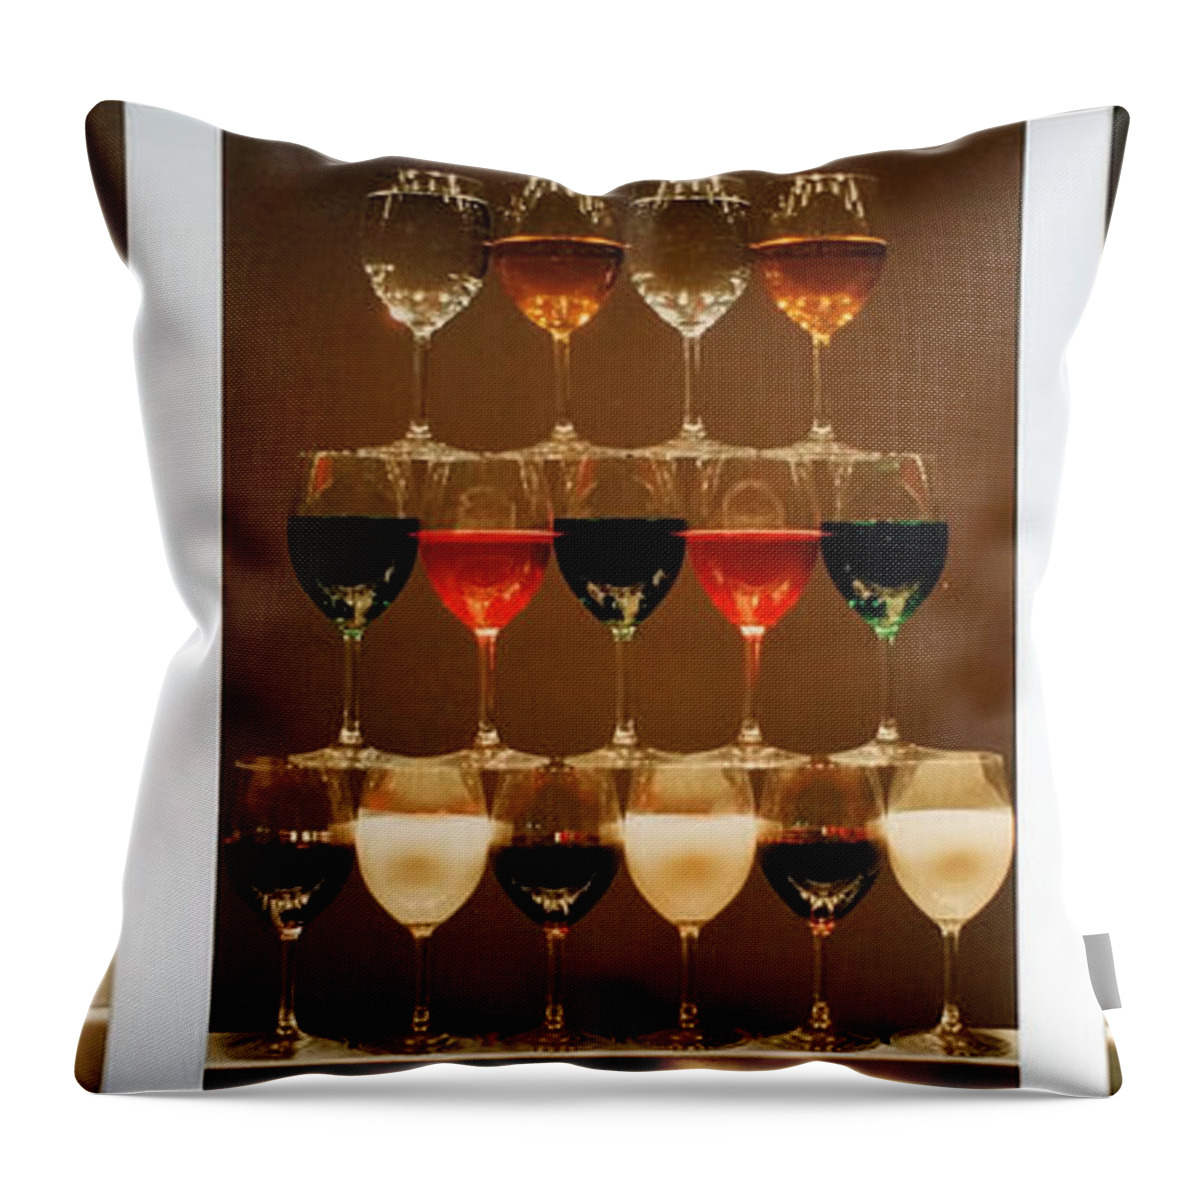  Throw Pillow featuring the photograph Tears and Wine by James Lanigan Thompson MFA